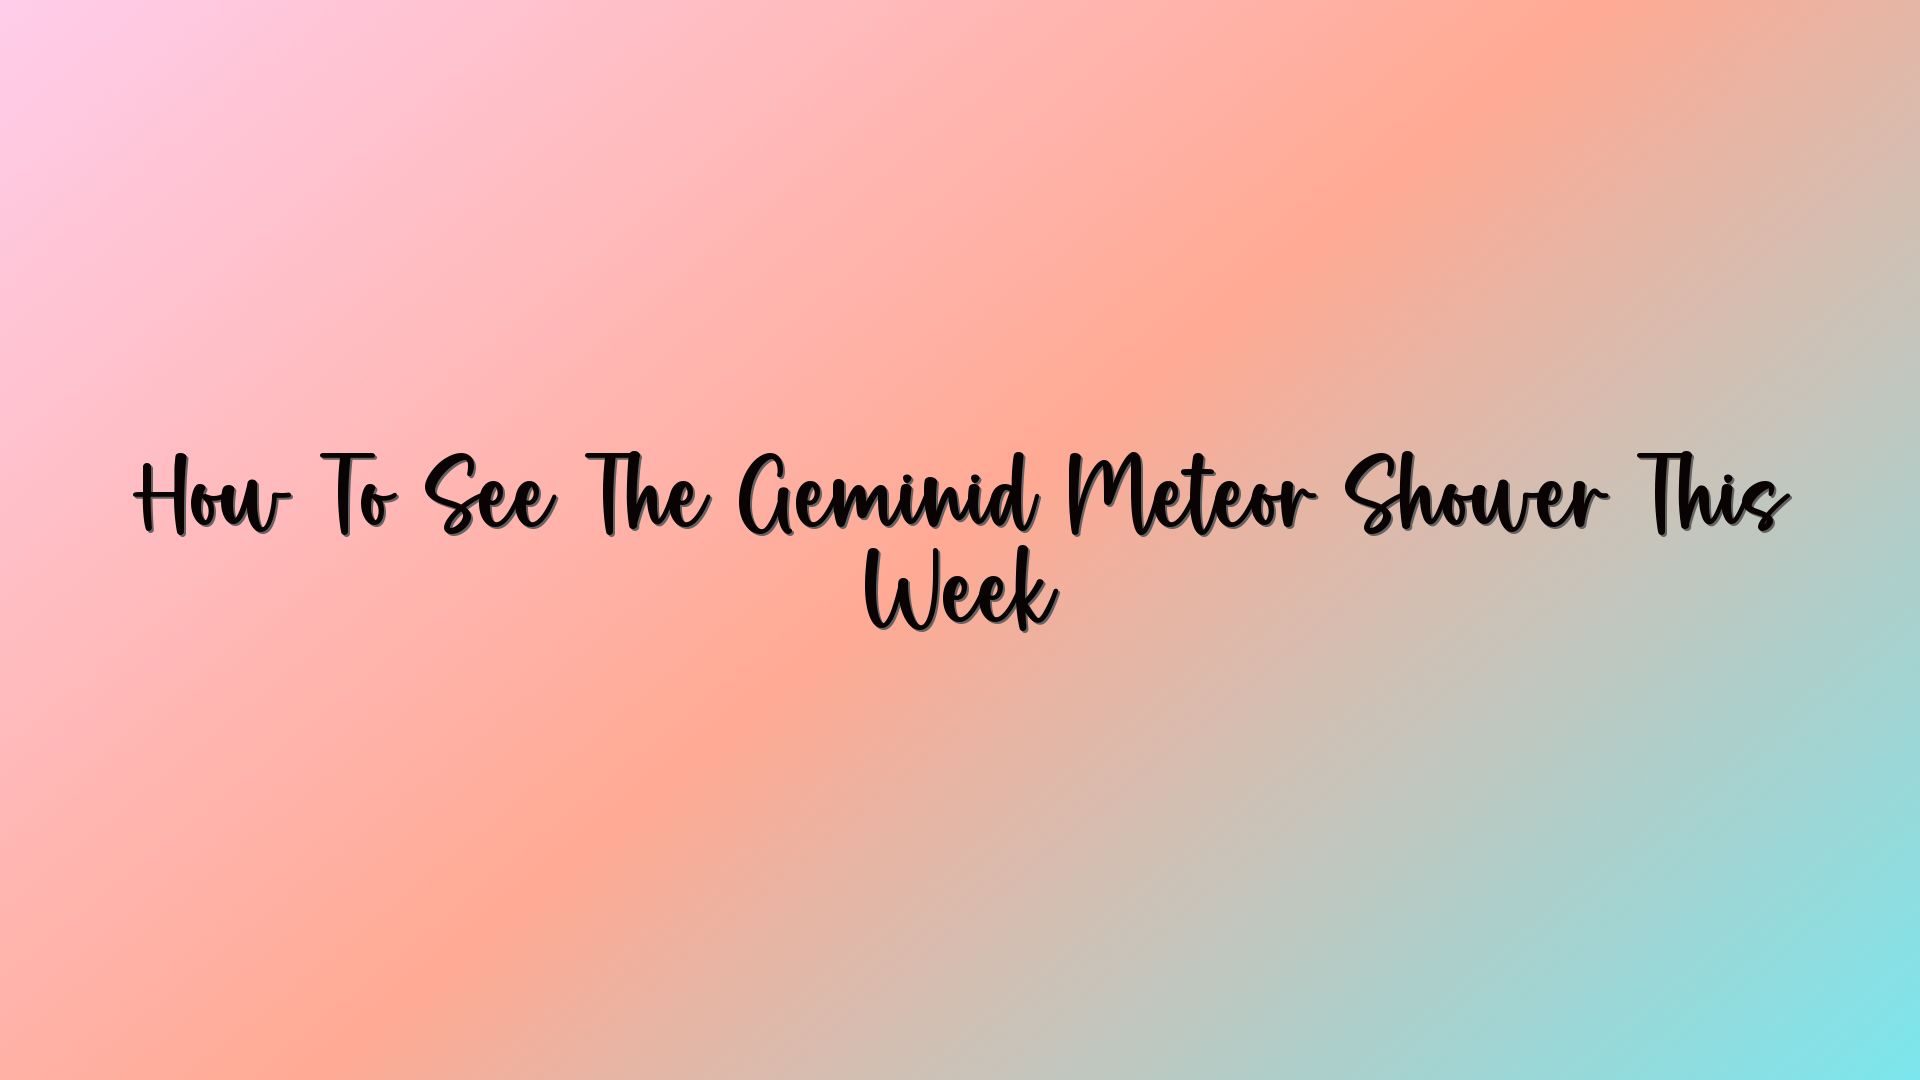 How To See The Geminid Meteor Shower This Week